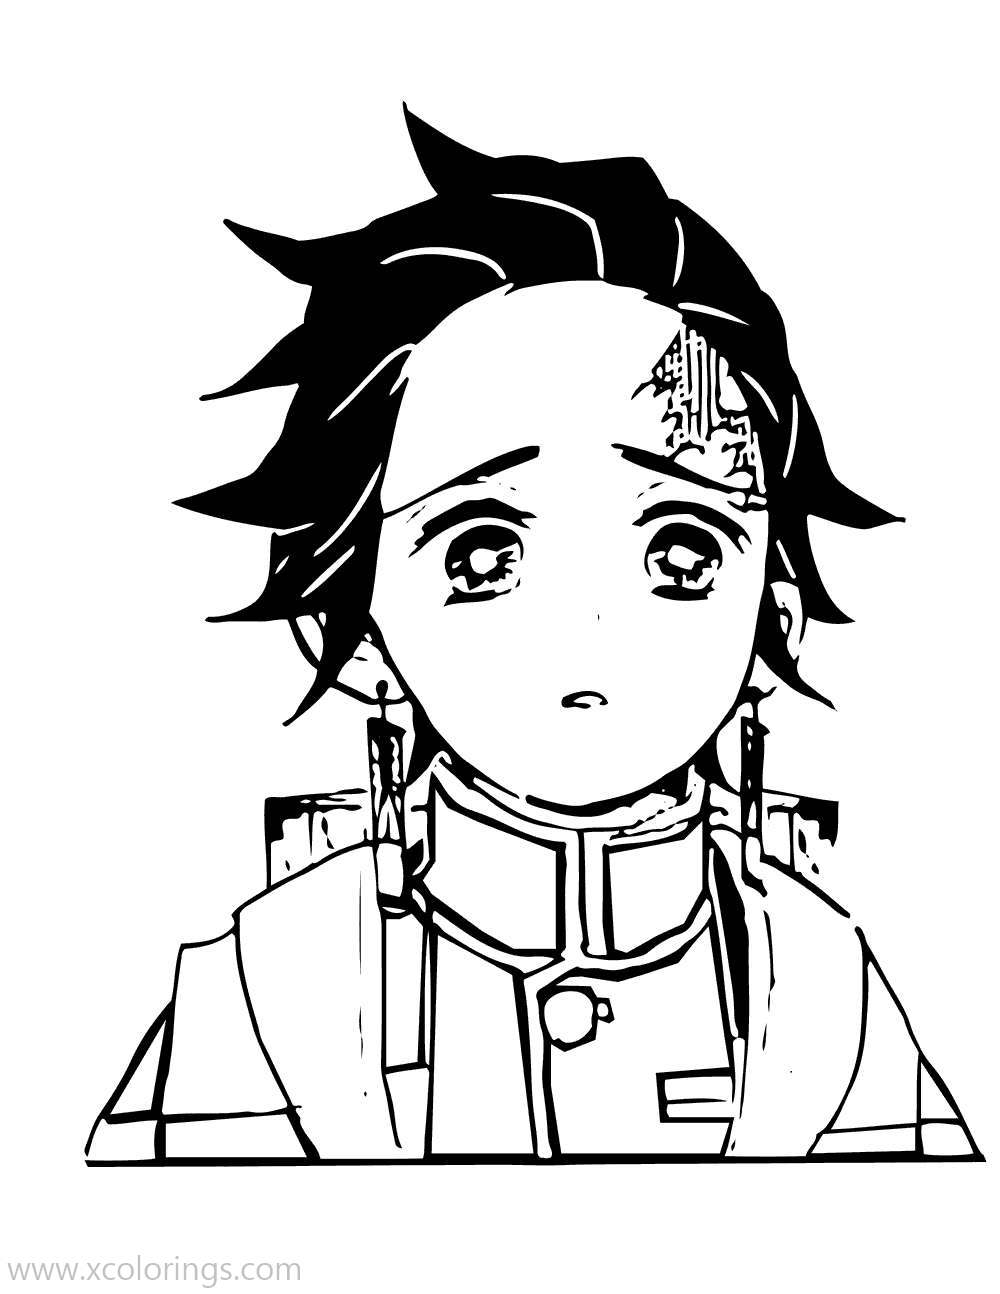 Demon Slayer Coloring Pages Tanjiro Kamado is not Happy - XColorings.com